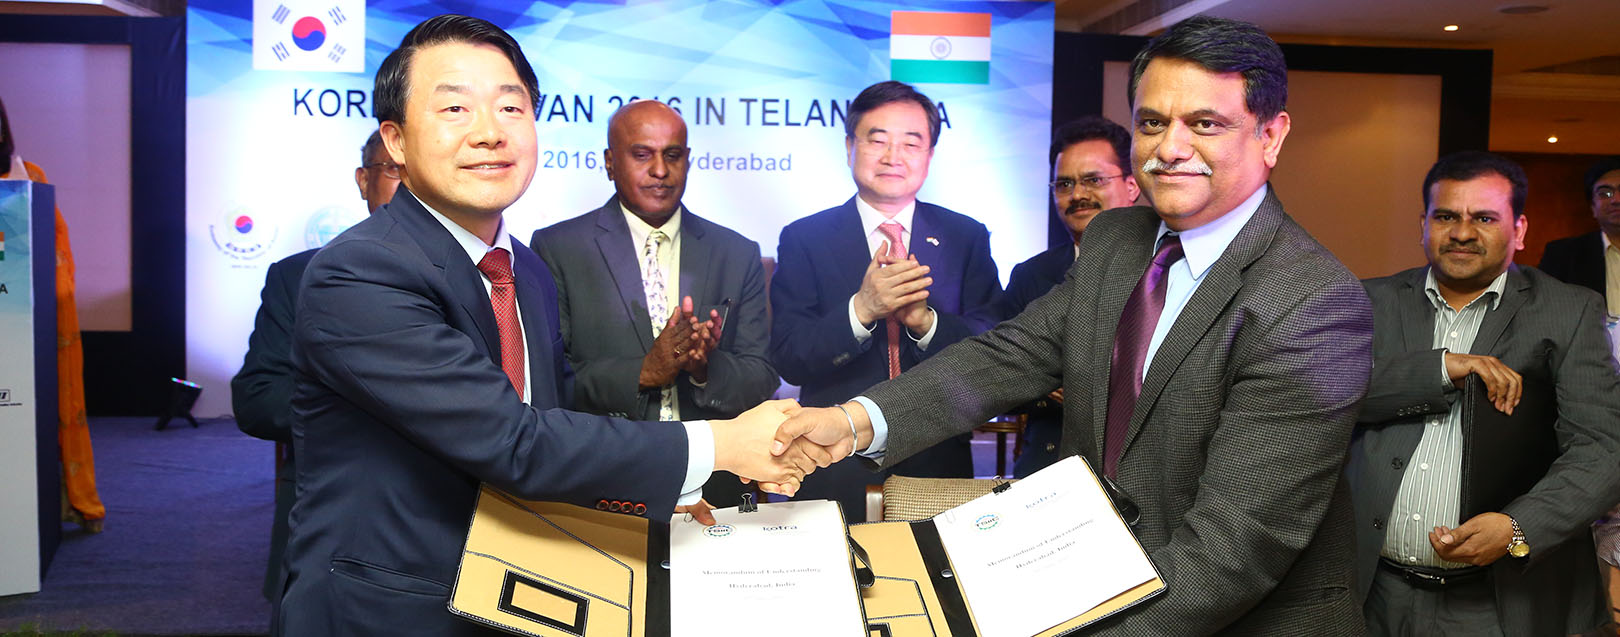 Telangana ready to offer land cluster to Korean cos